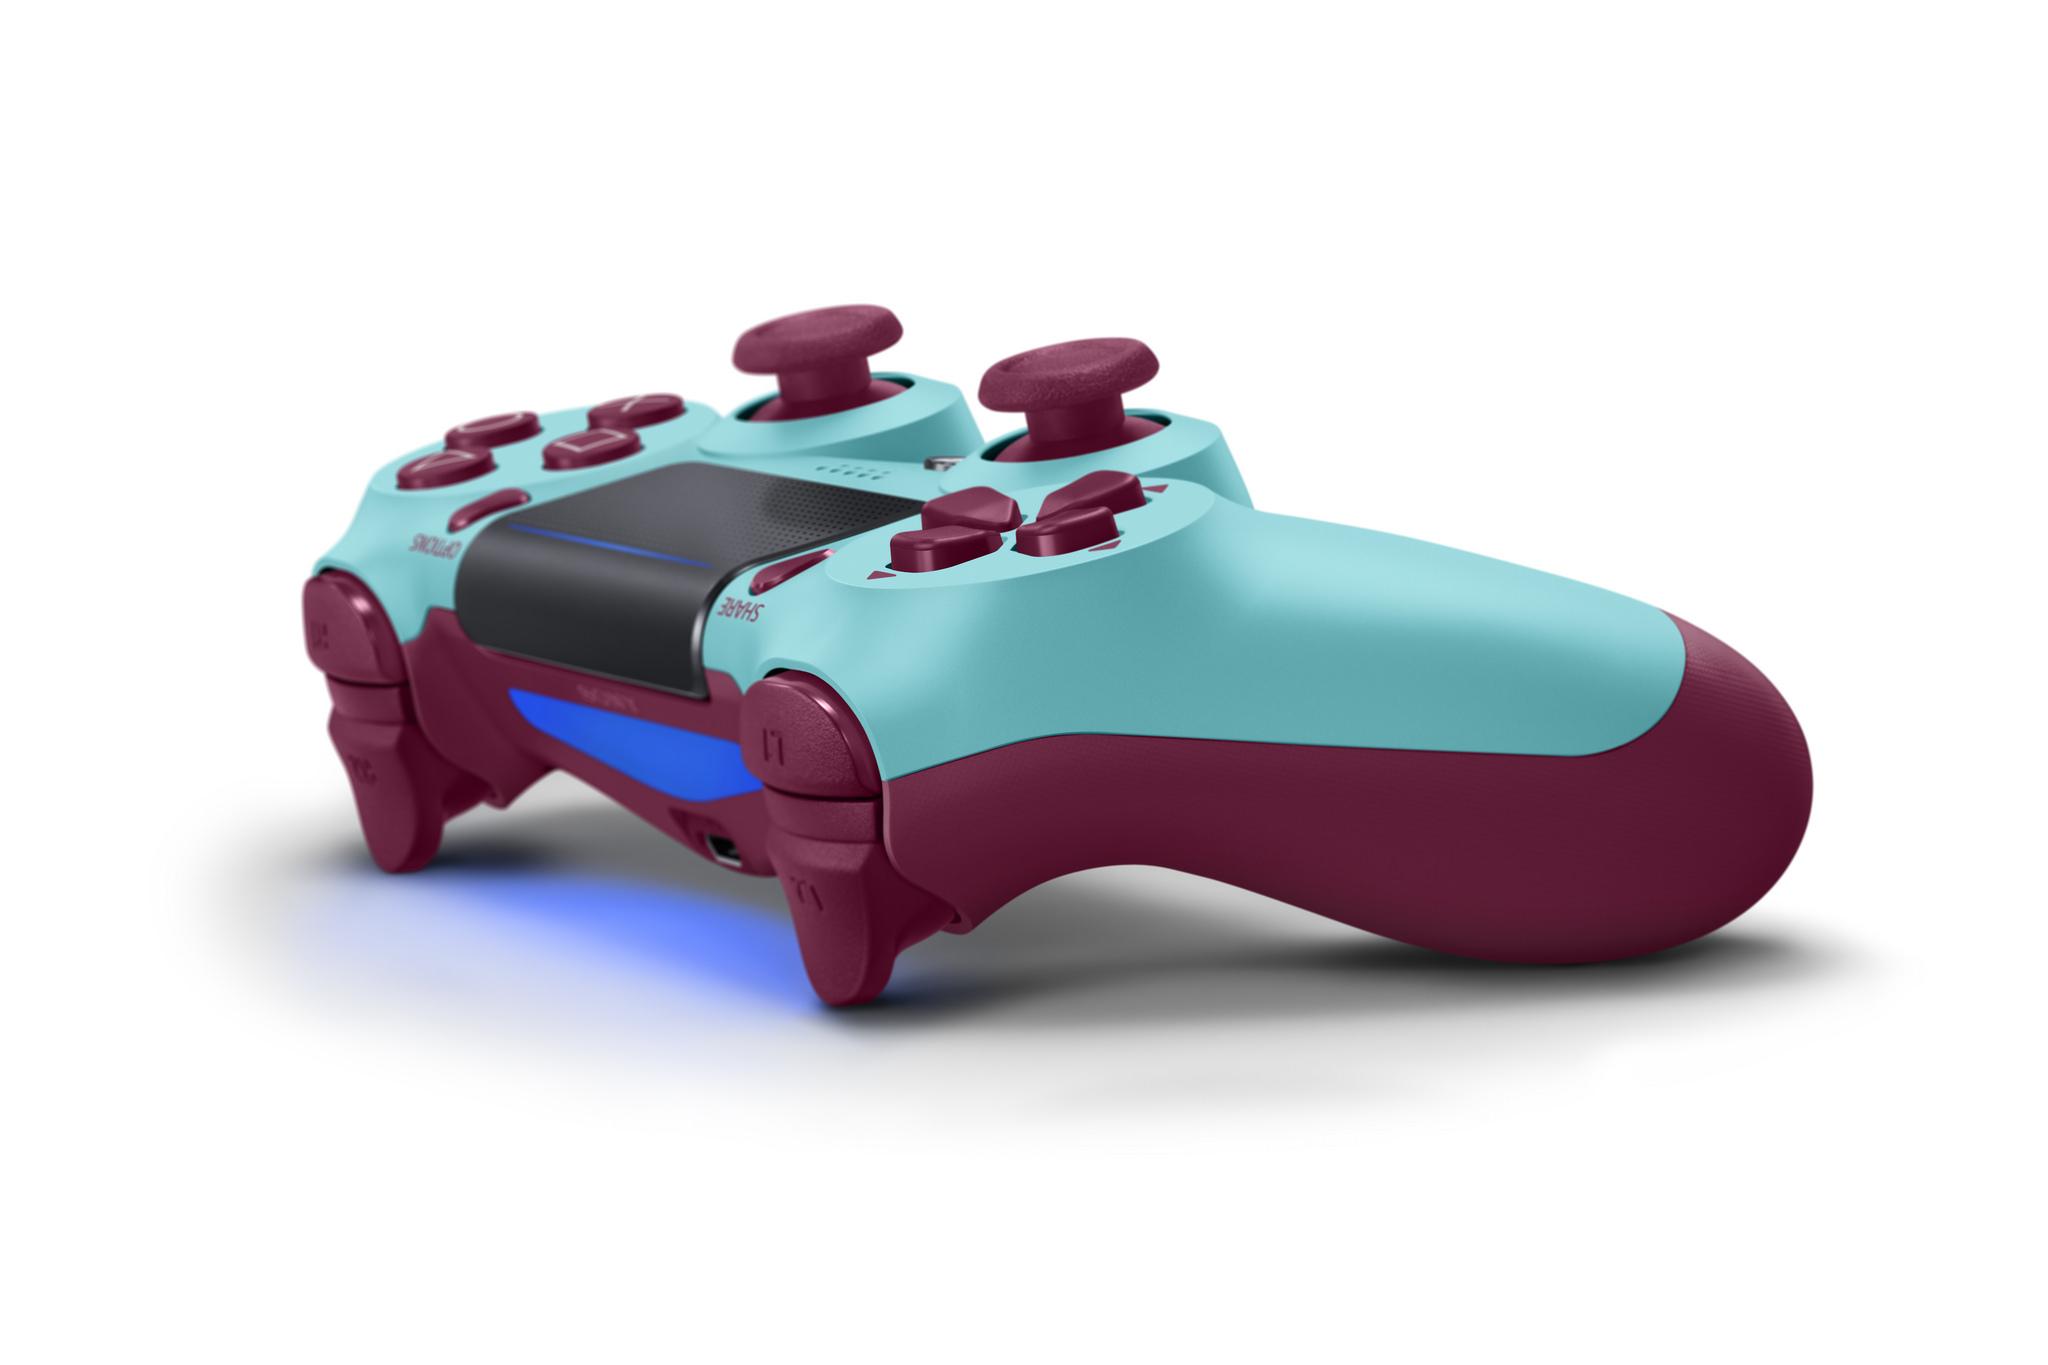 newest ps4 controller